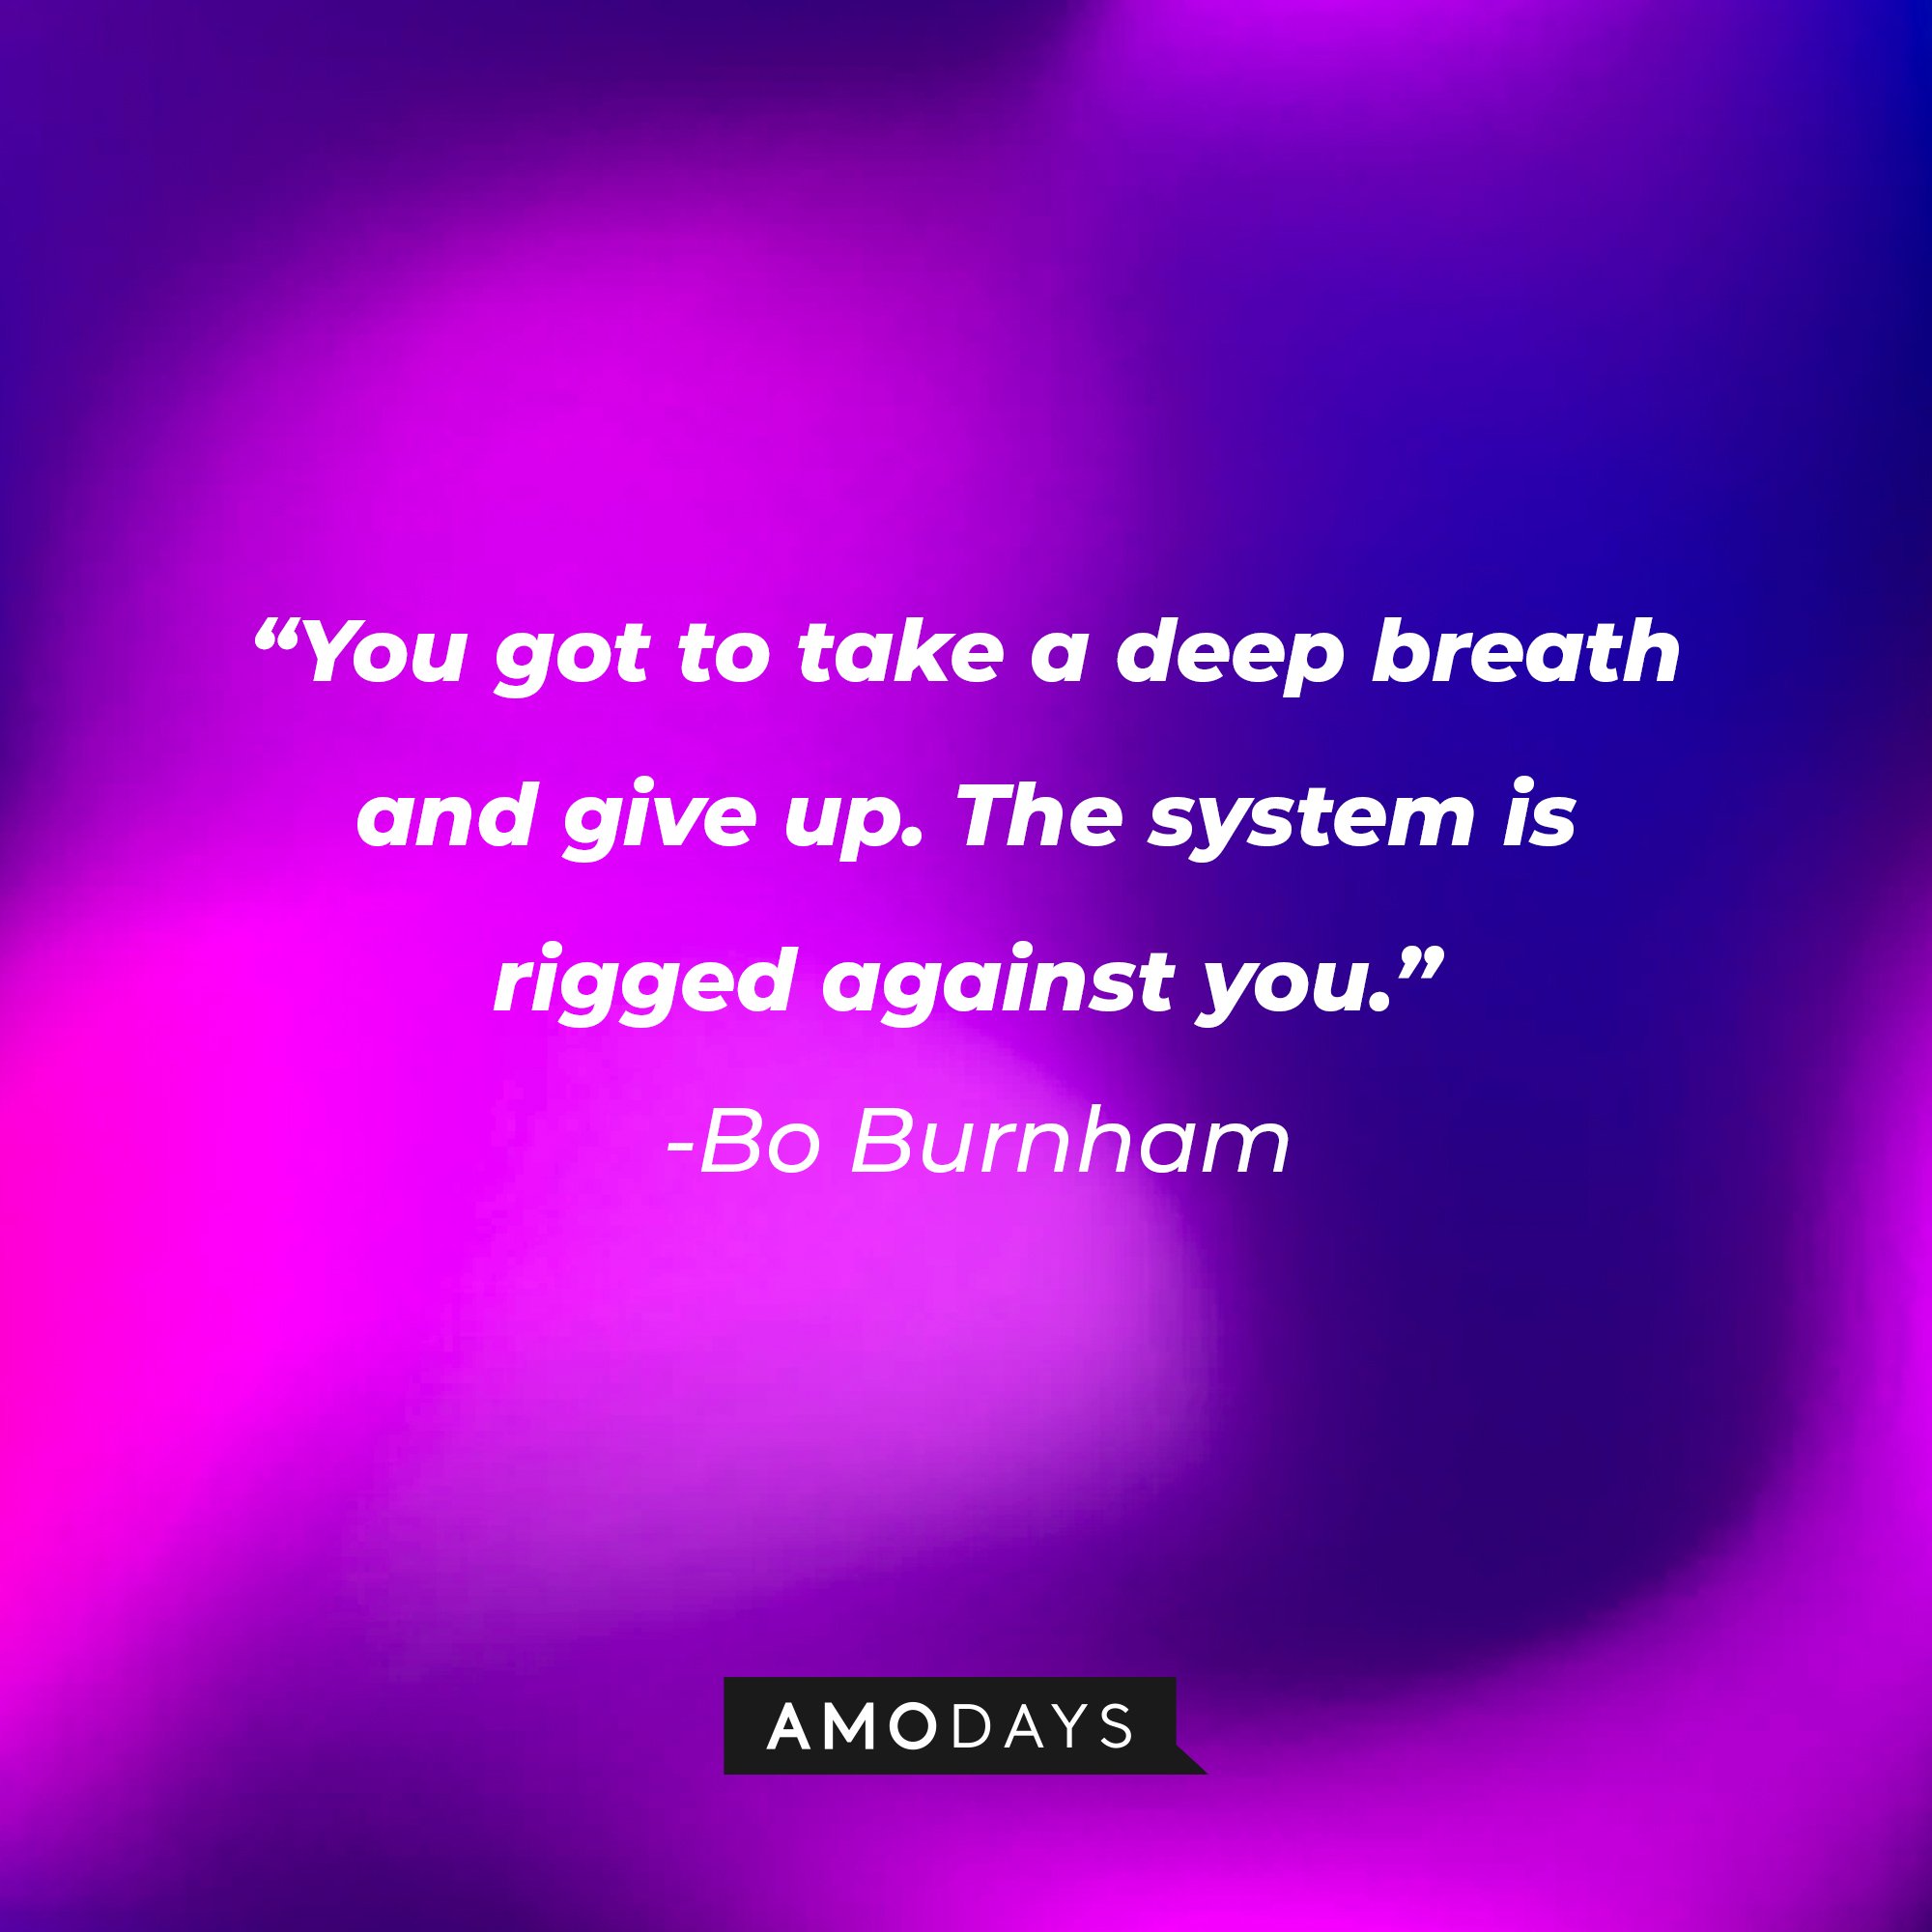 Bo Burnham’s quote: "You got to take a deep breath and give up. The system is rigged against you." | Image: AmoDays